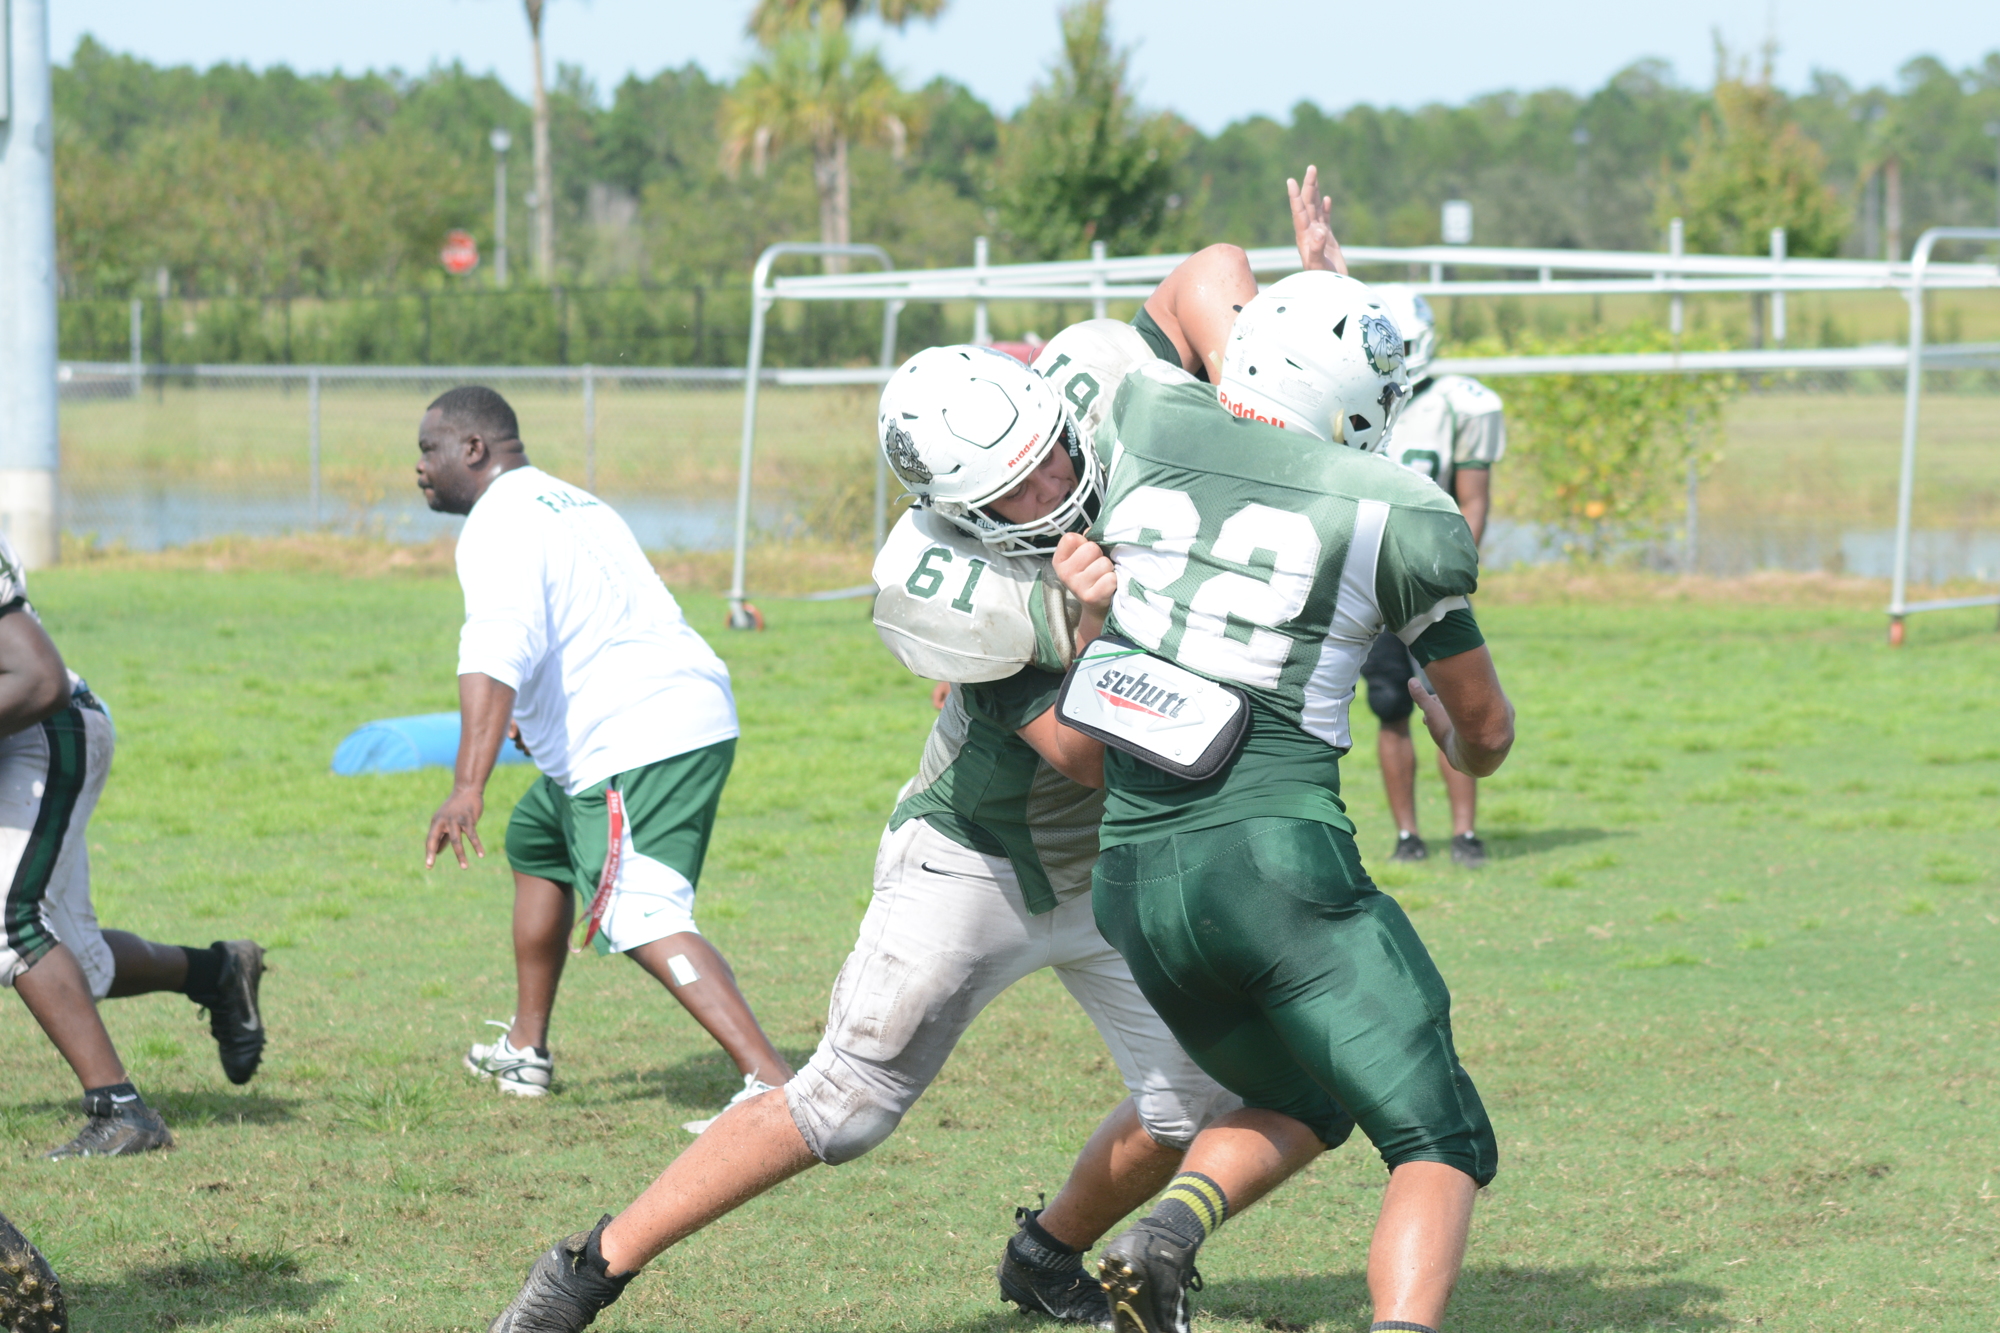 FPC left tackle Verneal Henshaw (No. 61) blocks a defender at practice. Photo by Ray Boone